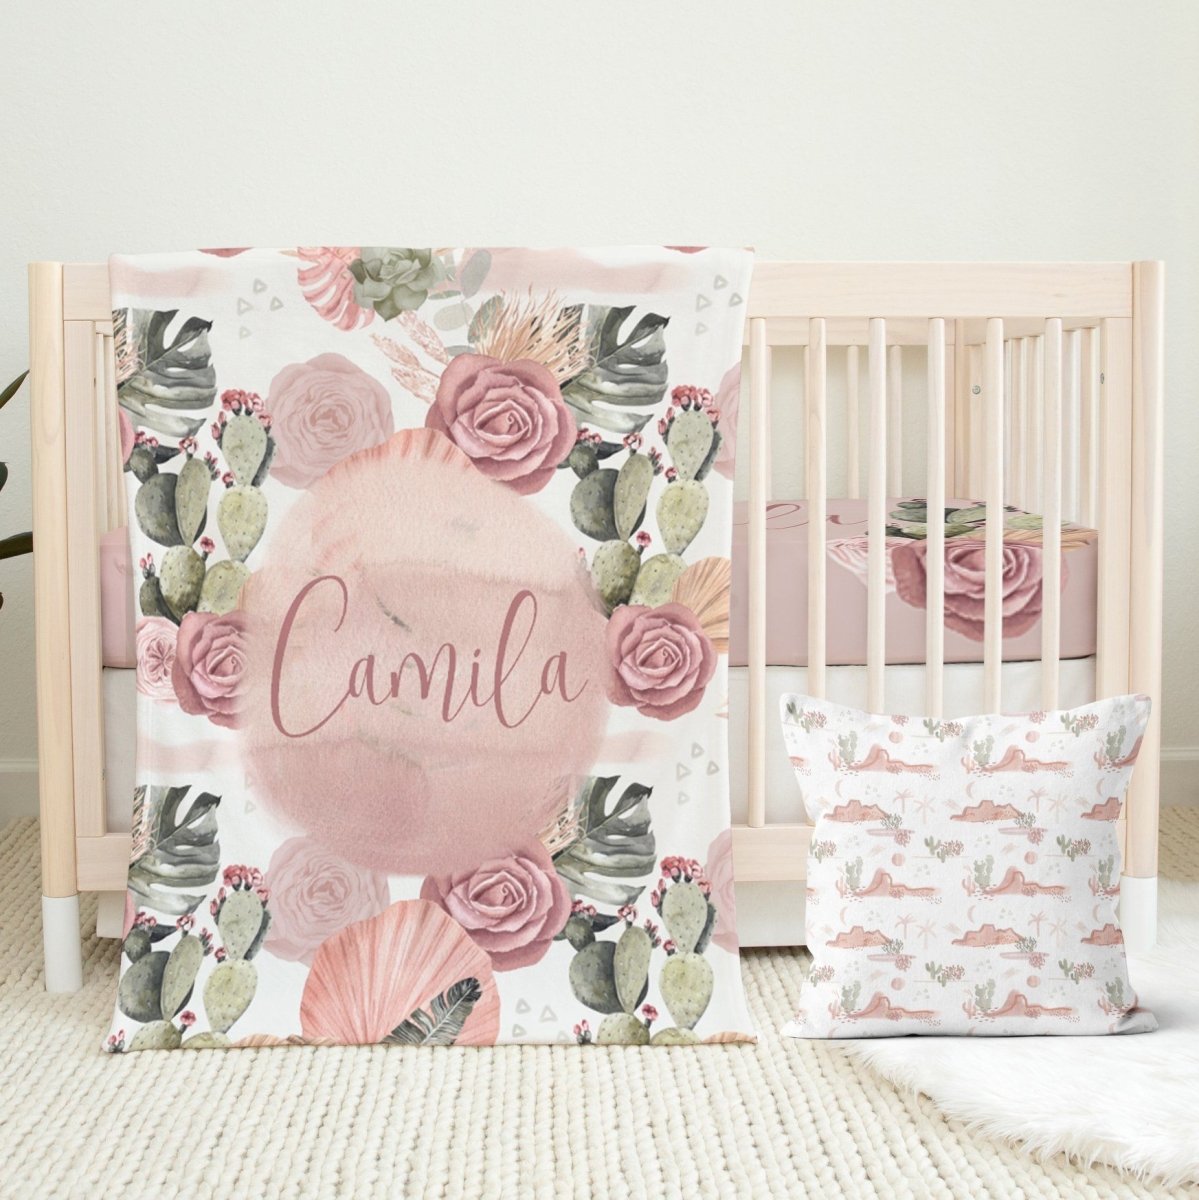 Desert Rose Personalized Crib Sheet - gender_girl, Personalized_Yes, text